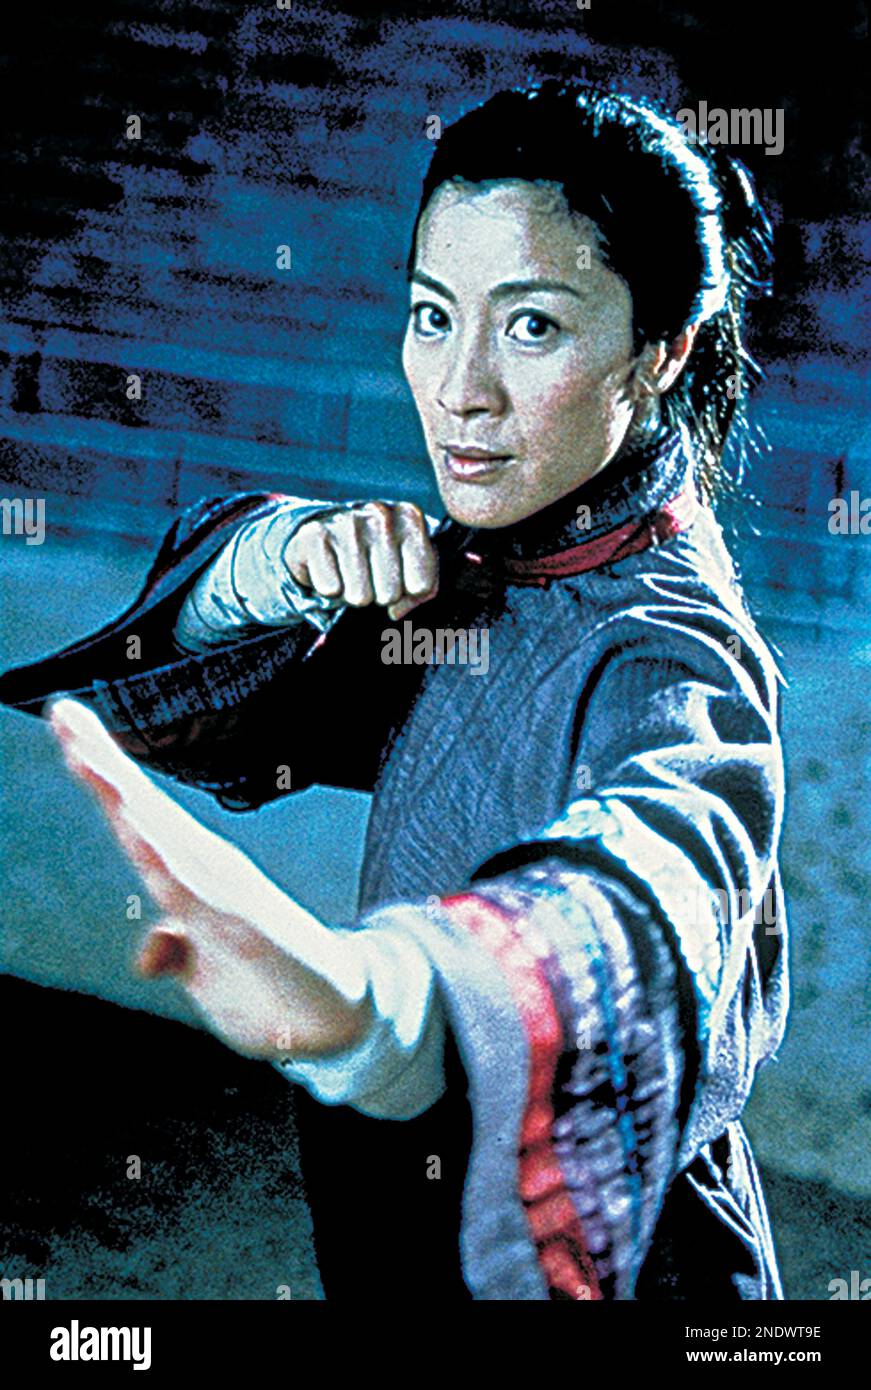 THEATRICAL RE-RELEASE DATE: 2023 back in theaters. ORIGINAL RELEASE: January 12, 2021. TITLE: Crouching Tiger, Hidden Dragon. STUDIO: Columbia Films. DIRECTOR: Ang Lee. PLOT: A young Chinese warrior steals a sword from a famed swordsman and then escapes into a world of romantic adventure with a mysterious man in the frontier of the nation. STARRING: Chow Yun-Fat, Michelle Yeoh, Ziyi Zhang. (Credit Image: © Columbia Films/Entertainment Pictures/ZUMAPRESS.com) EDITORIAL USAGE ONLY! Not for Commercial USAGE! Stock Photo